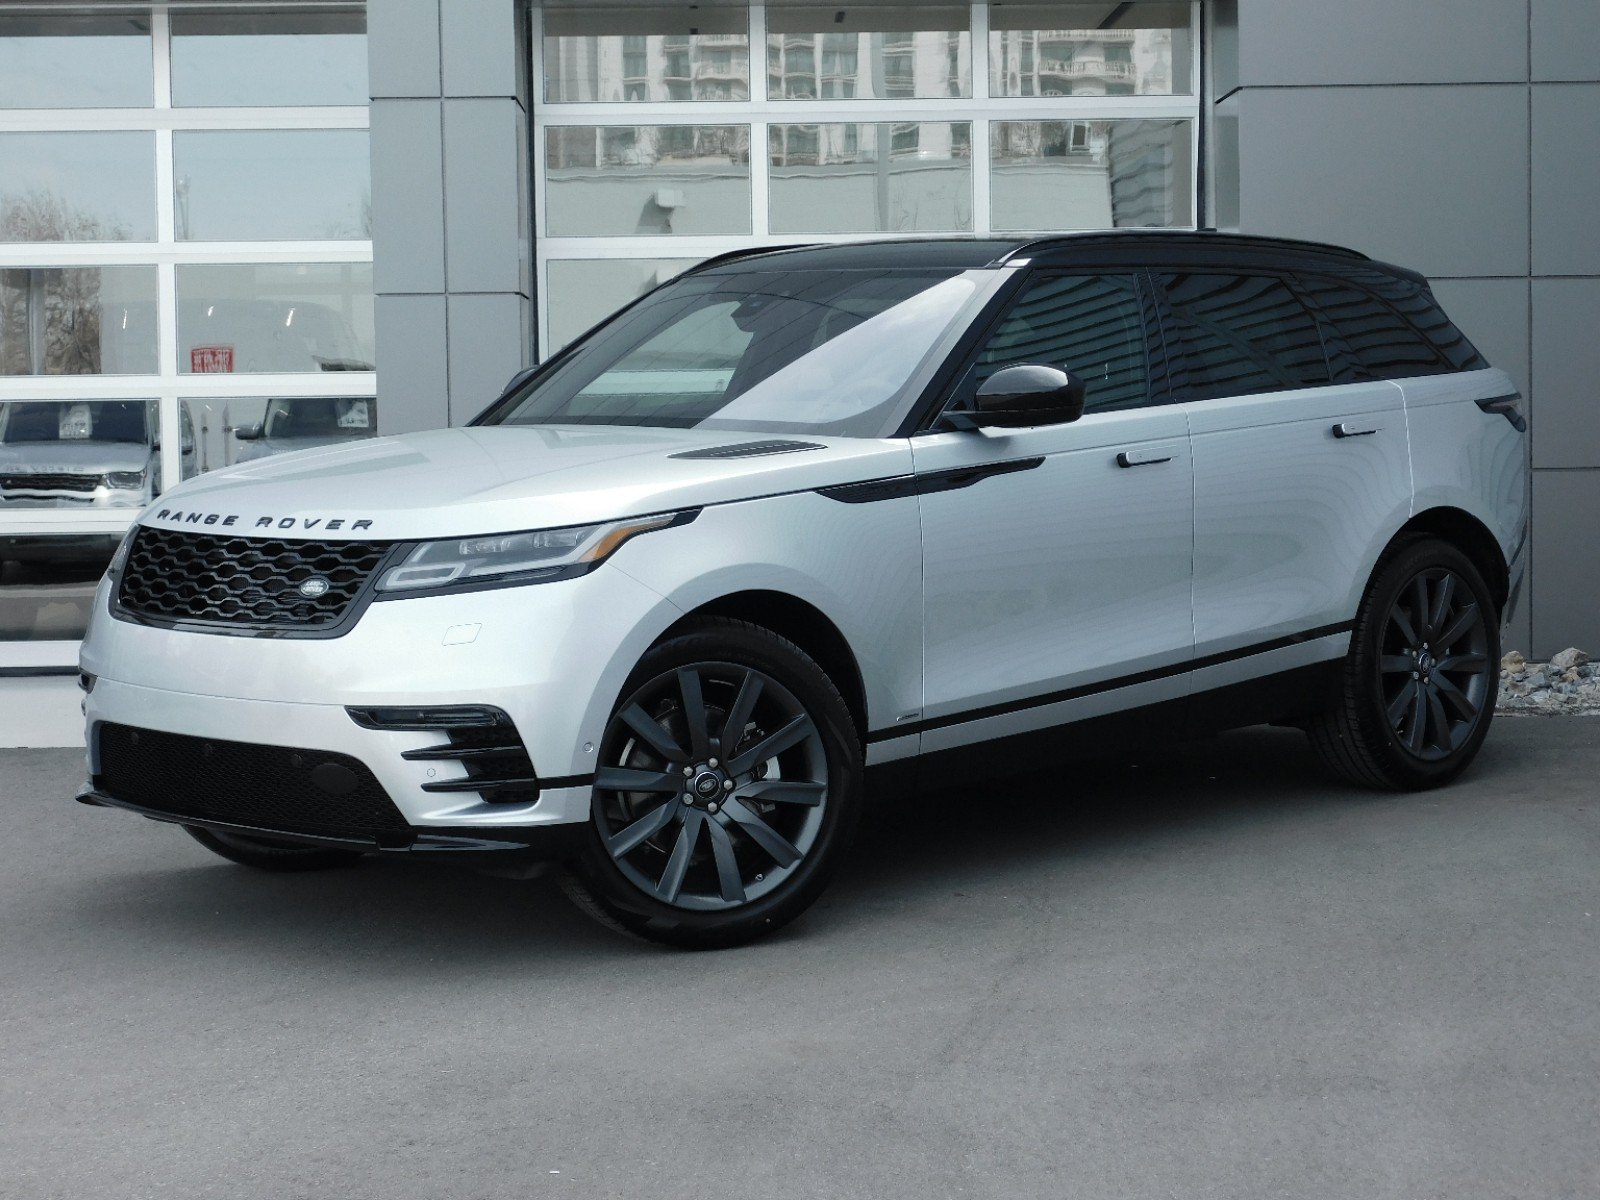 New Land Rover Range Rover Velar R Dynamic Hse With Navigation 4wd